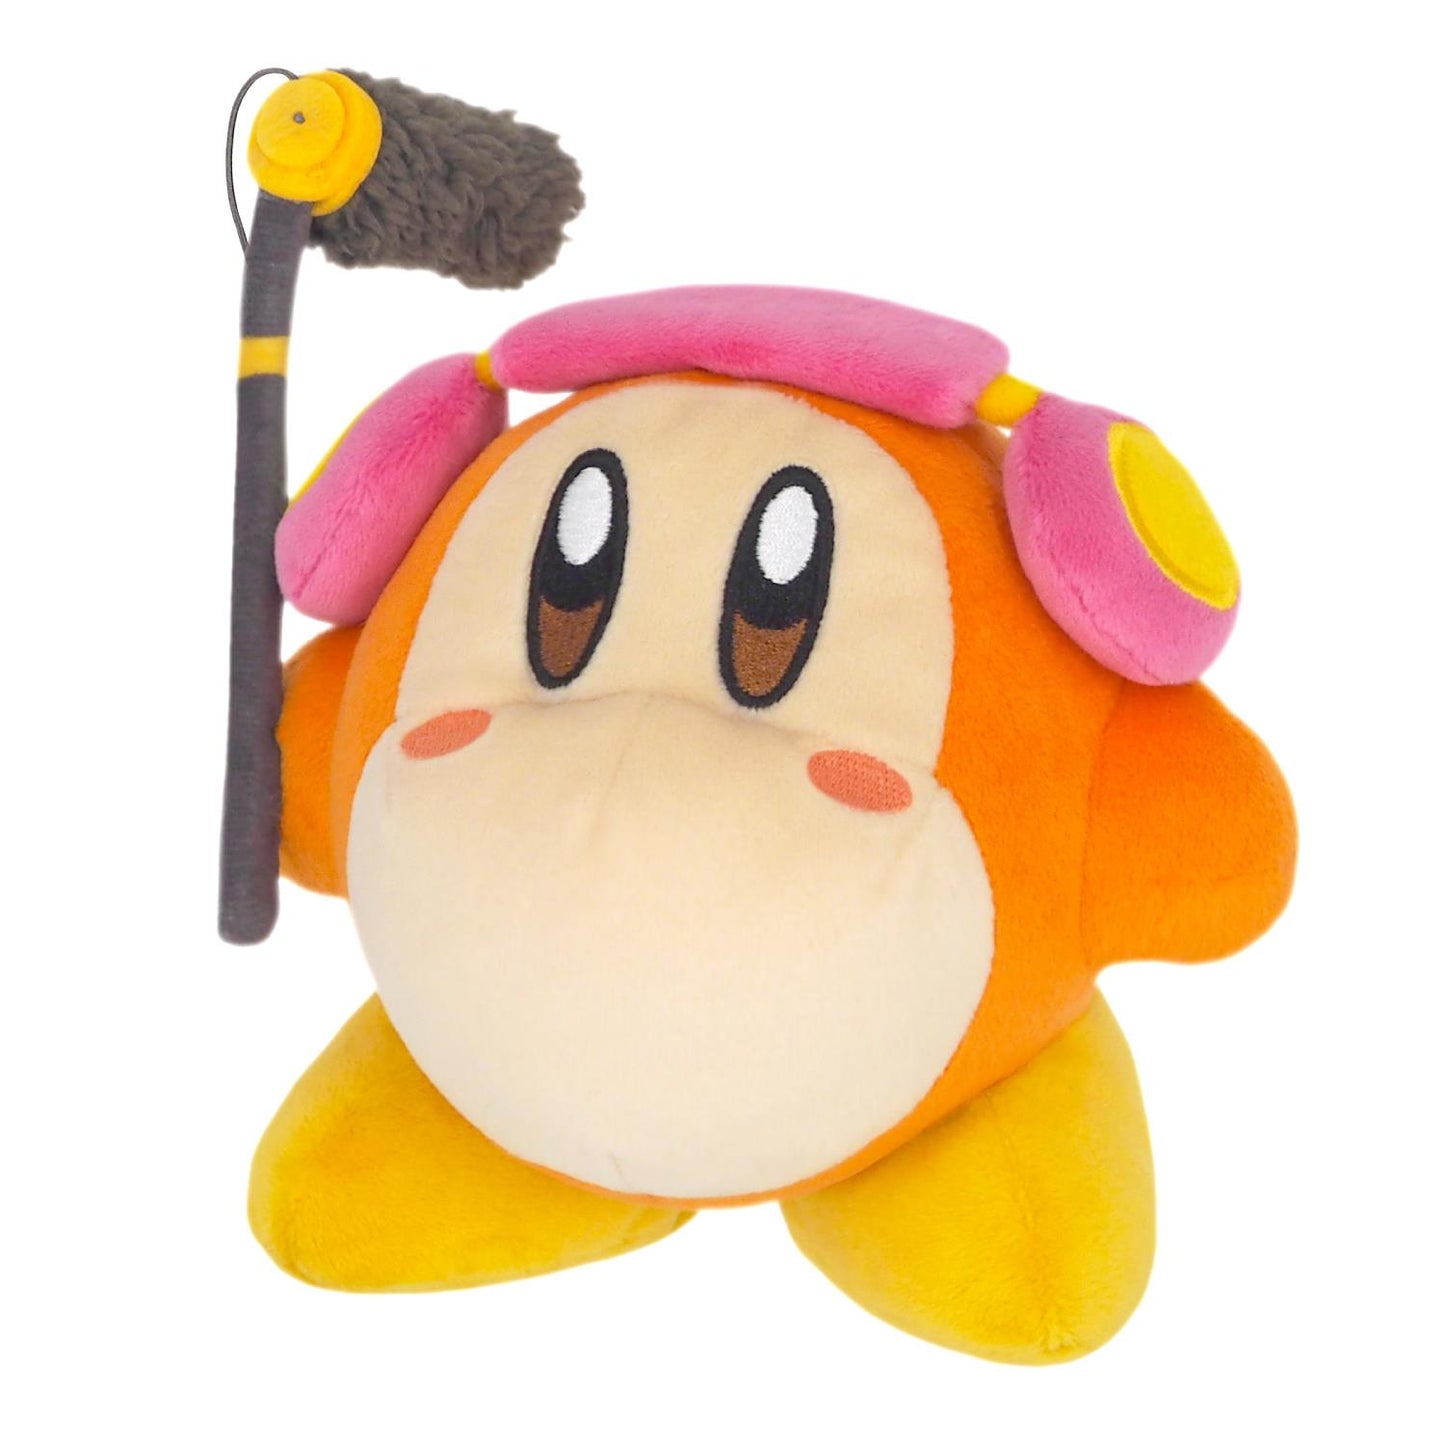 Kirby: Waddle Dee Report Team Microphone (S) Plush